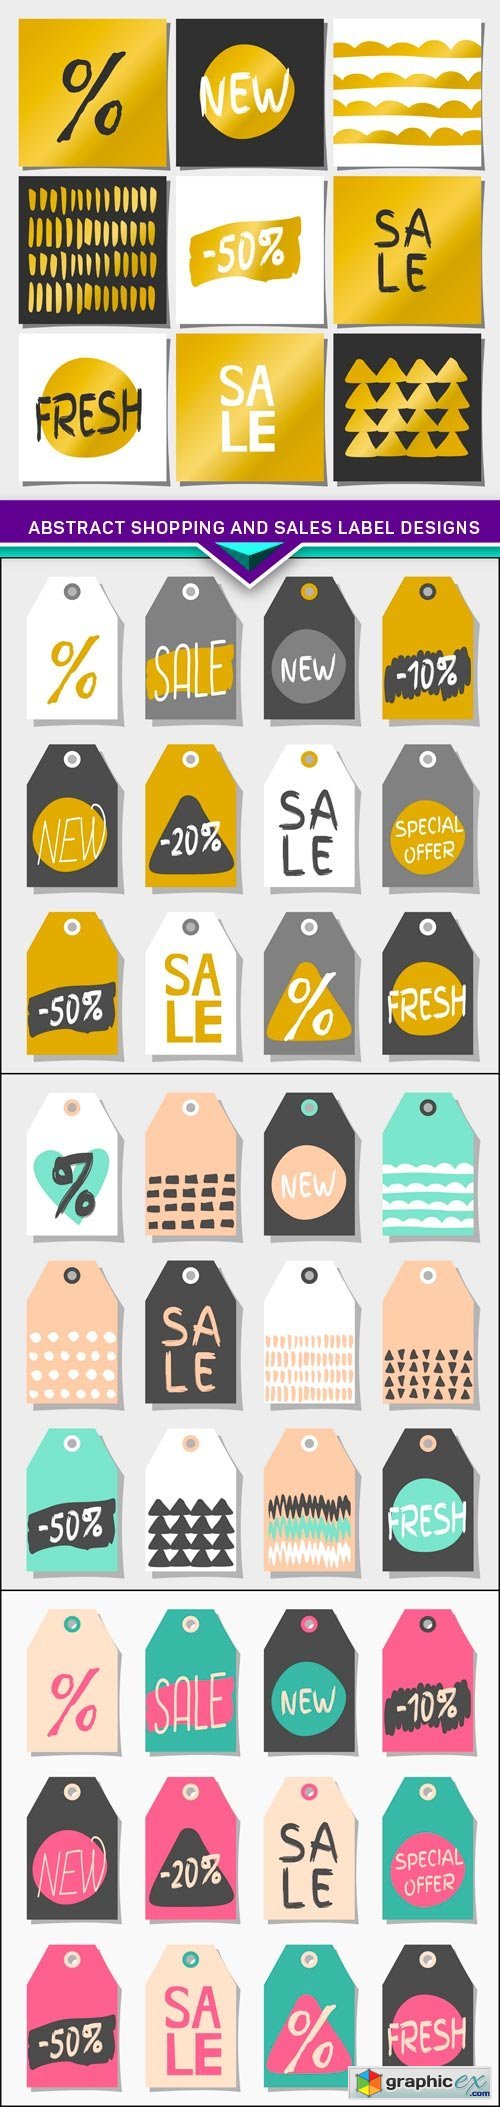 Abstract Shopping and Sales Label Designs 4X EPS